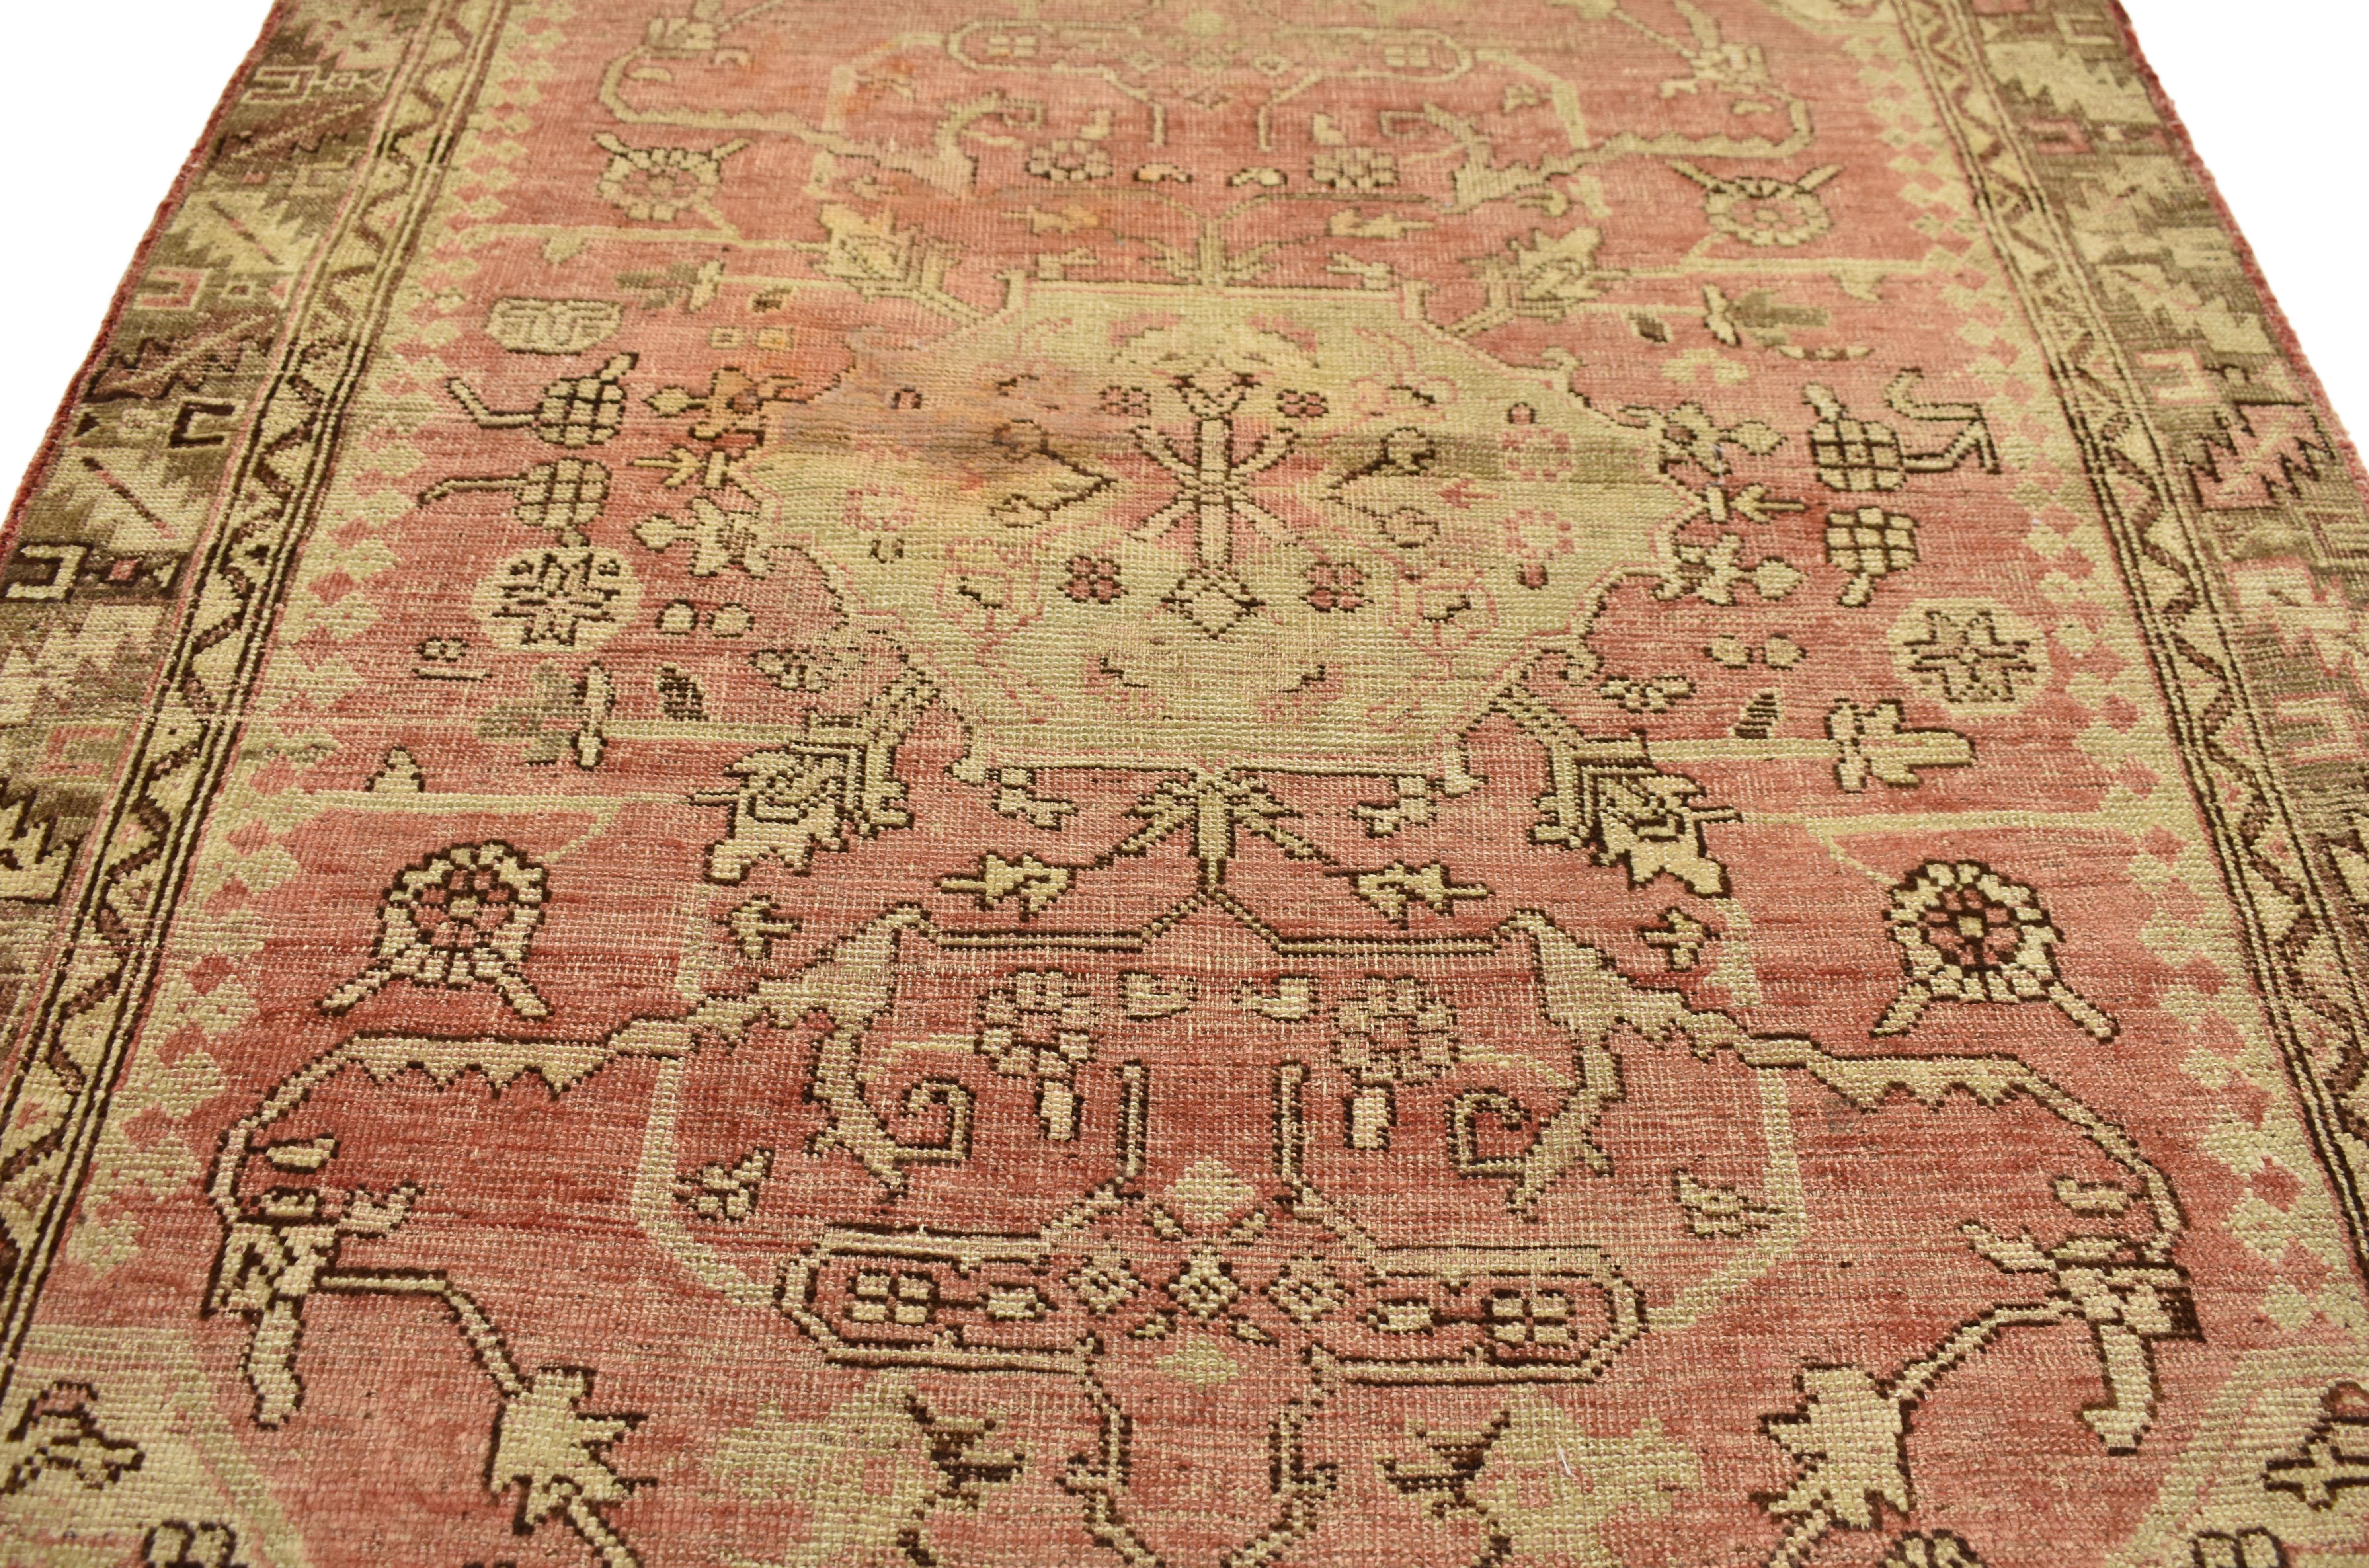 51691, vintage Turkish Oushak accent rug, entry or Foyer rug. This hand knotted wool vintage Turkish Oushak rug features a latch-hooked hexagonal center medallion surrounded by an all-over floral pattern on an abrashed field. Palmettes and vines